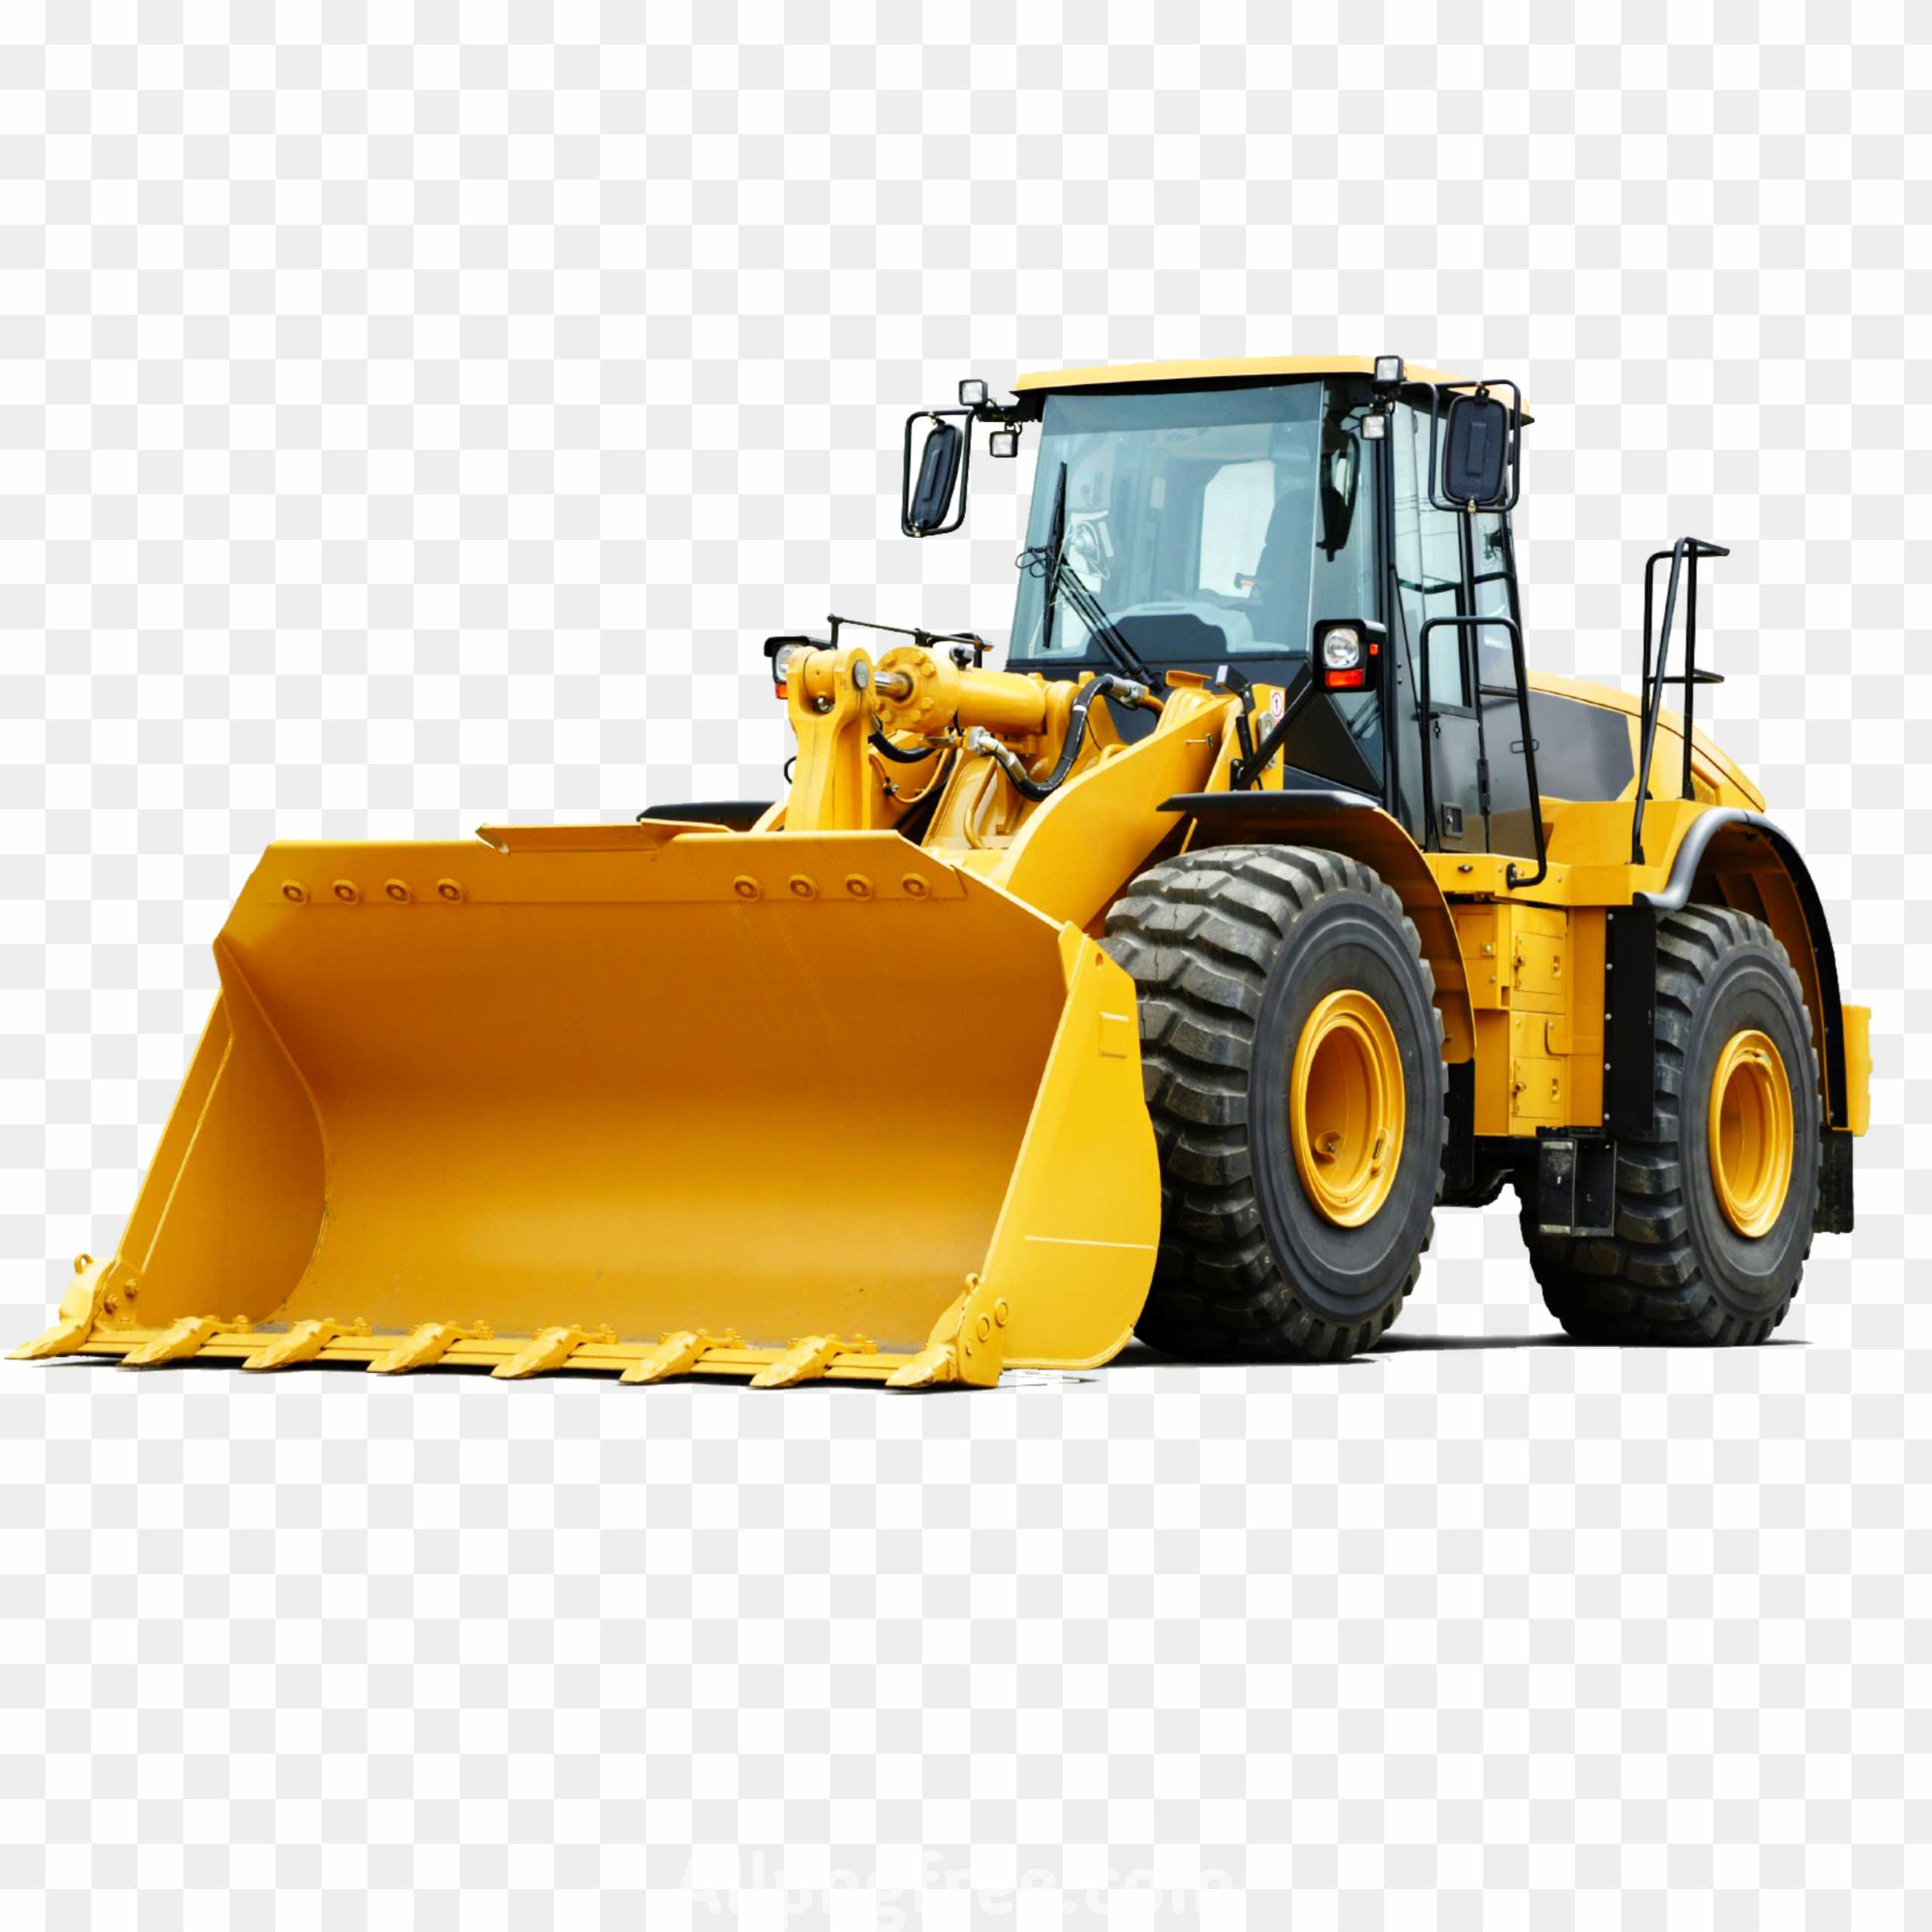 Bulldozer hd png images download